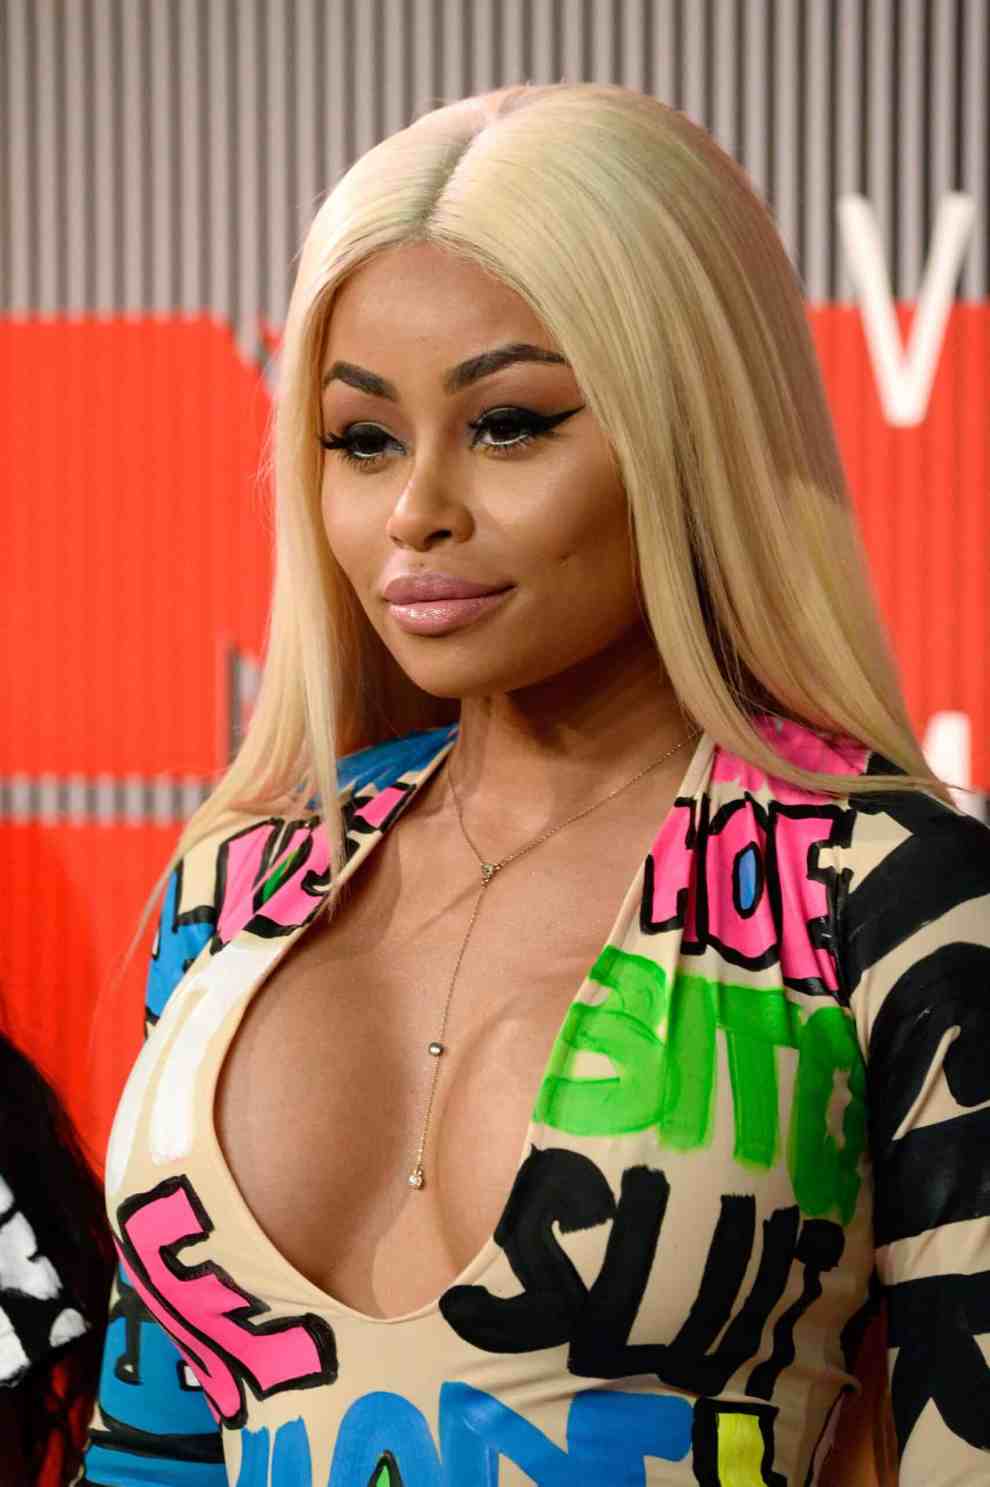 Blac Chyna attending the 2015 MTV Video Music Awards